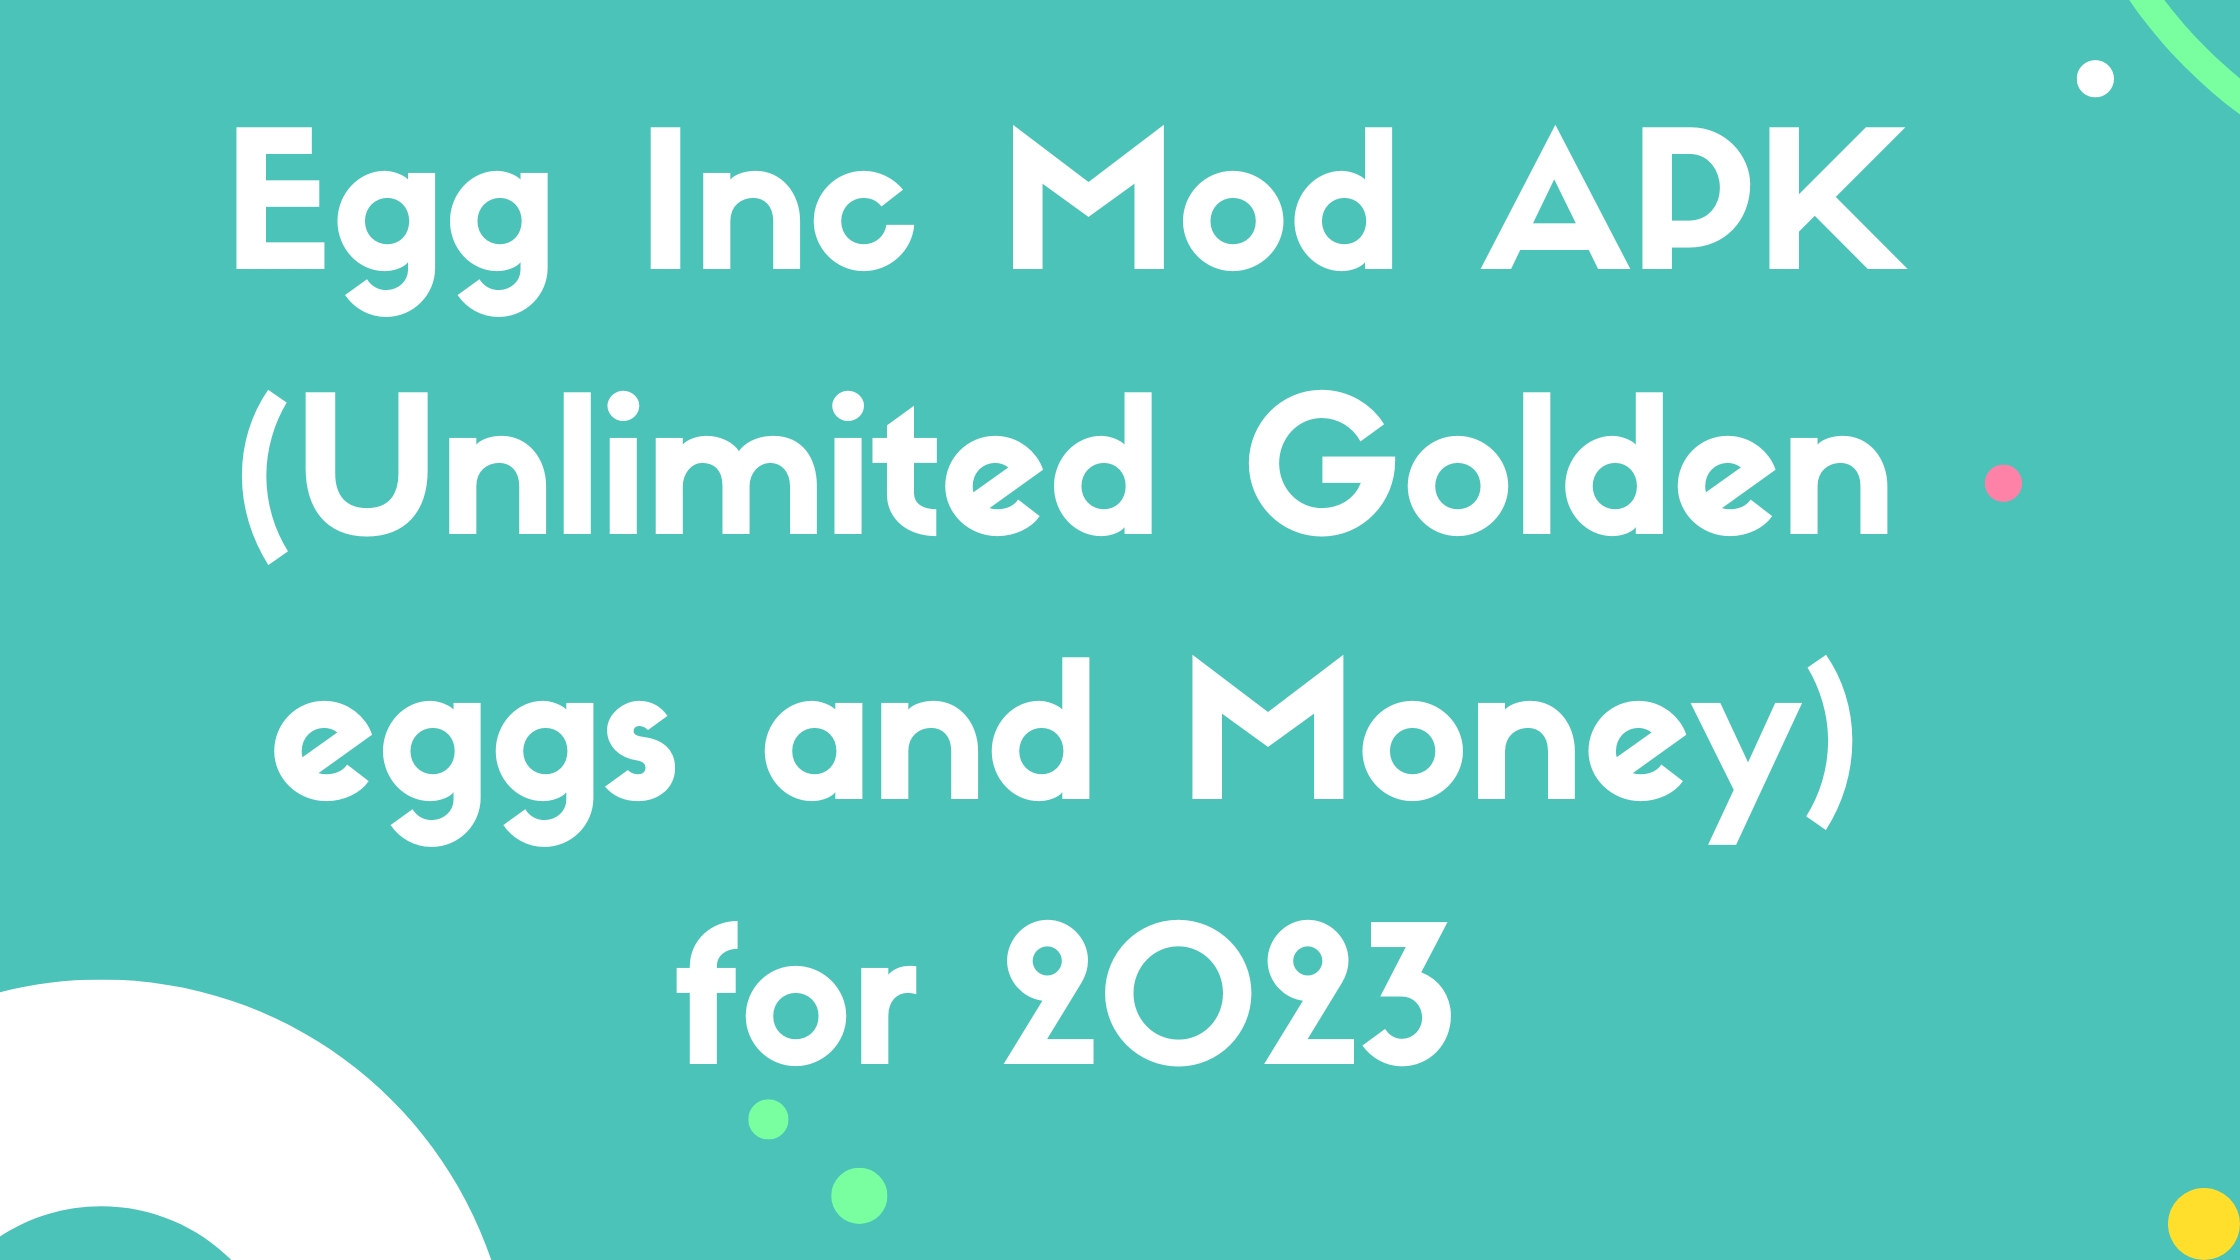 Egg Inc Mod APK (Unlimited Golden eggs and Money) for 2023